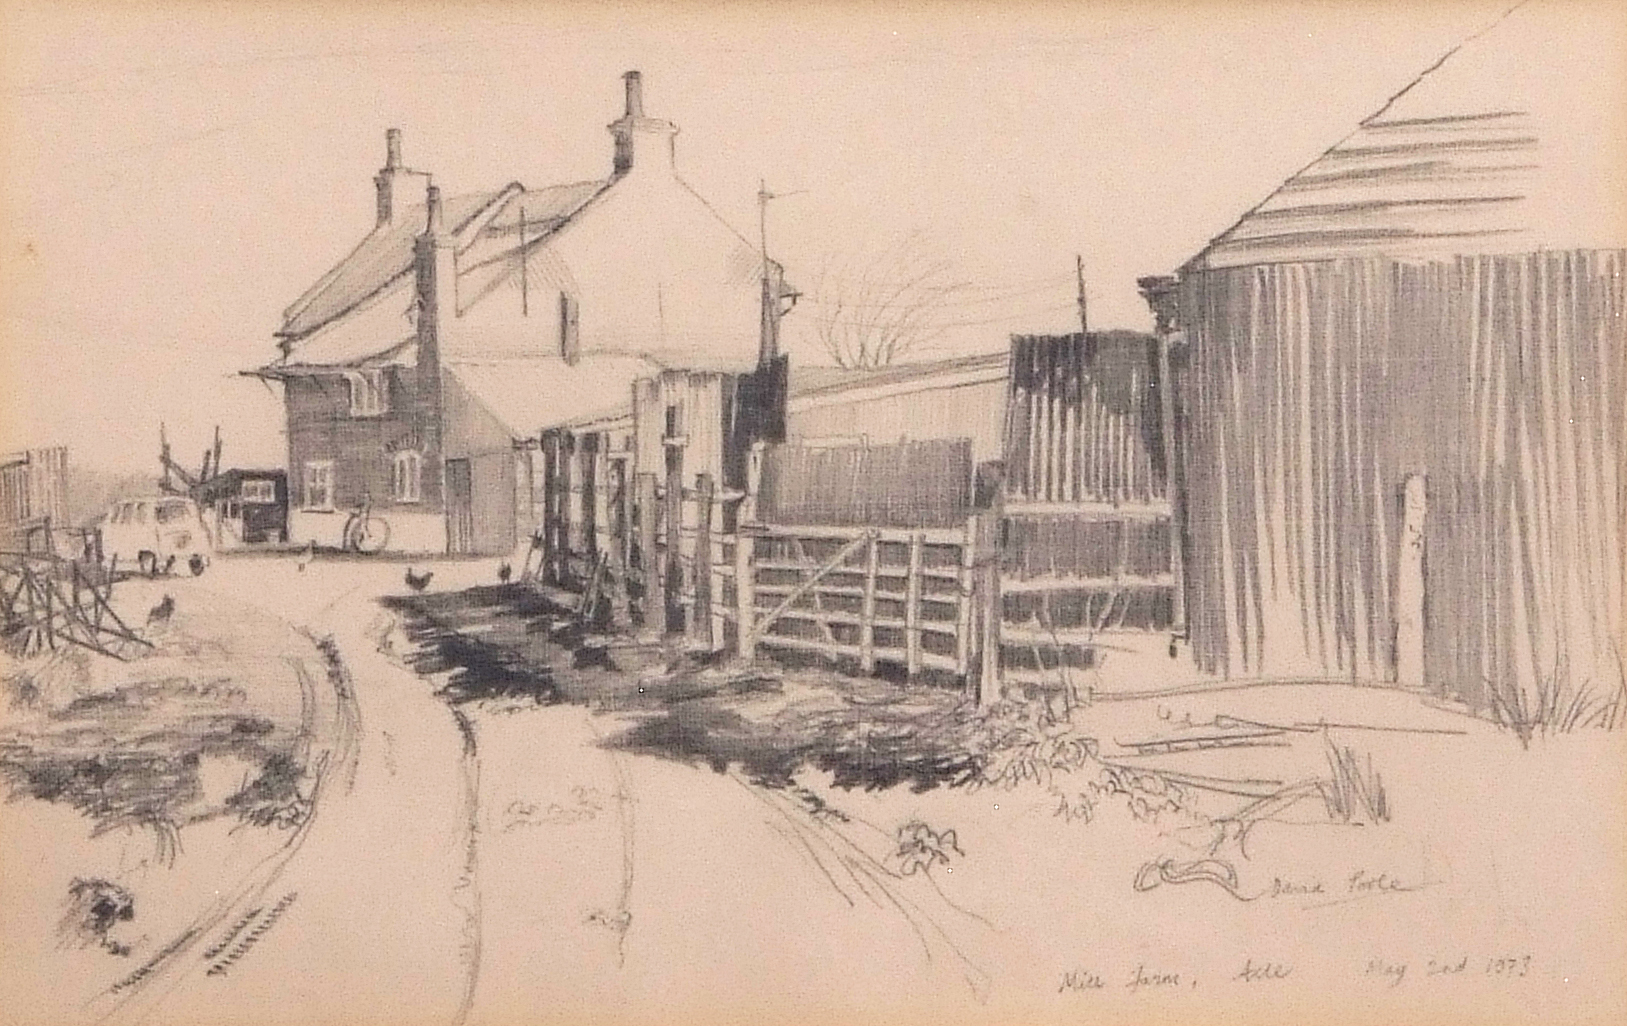 AR David Poole (1936-1995), "Mill Farm, Acle, May 2nd 1973", pencil drawing, signed and inscribed